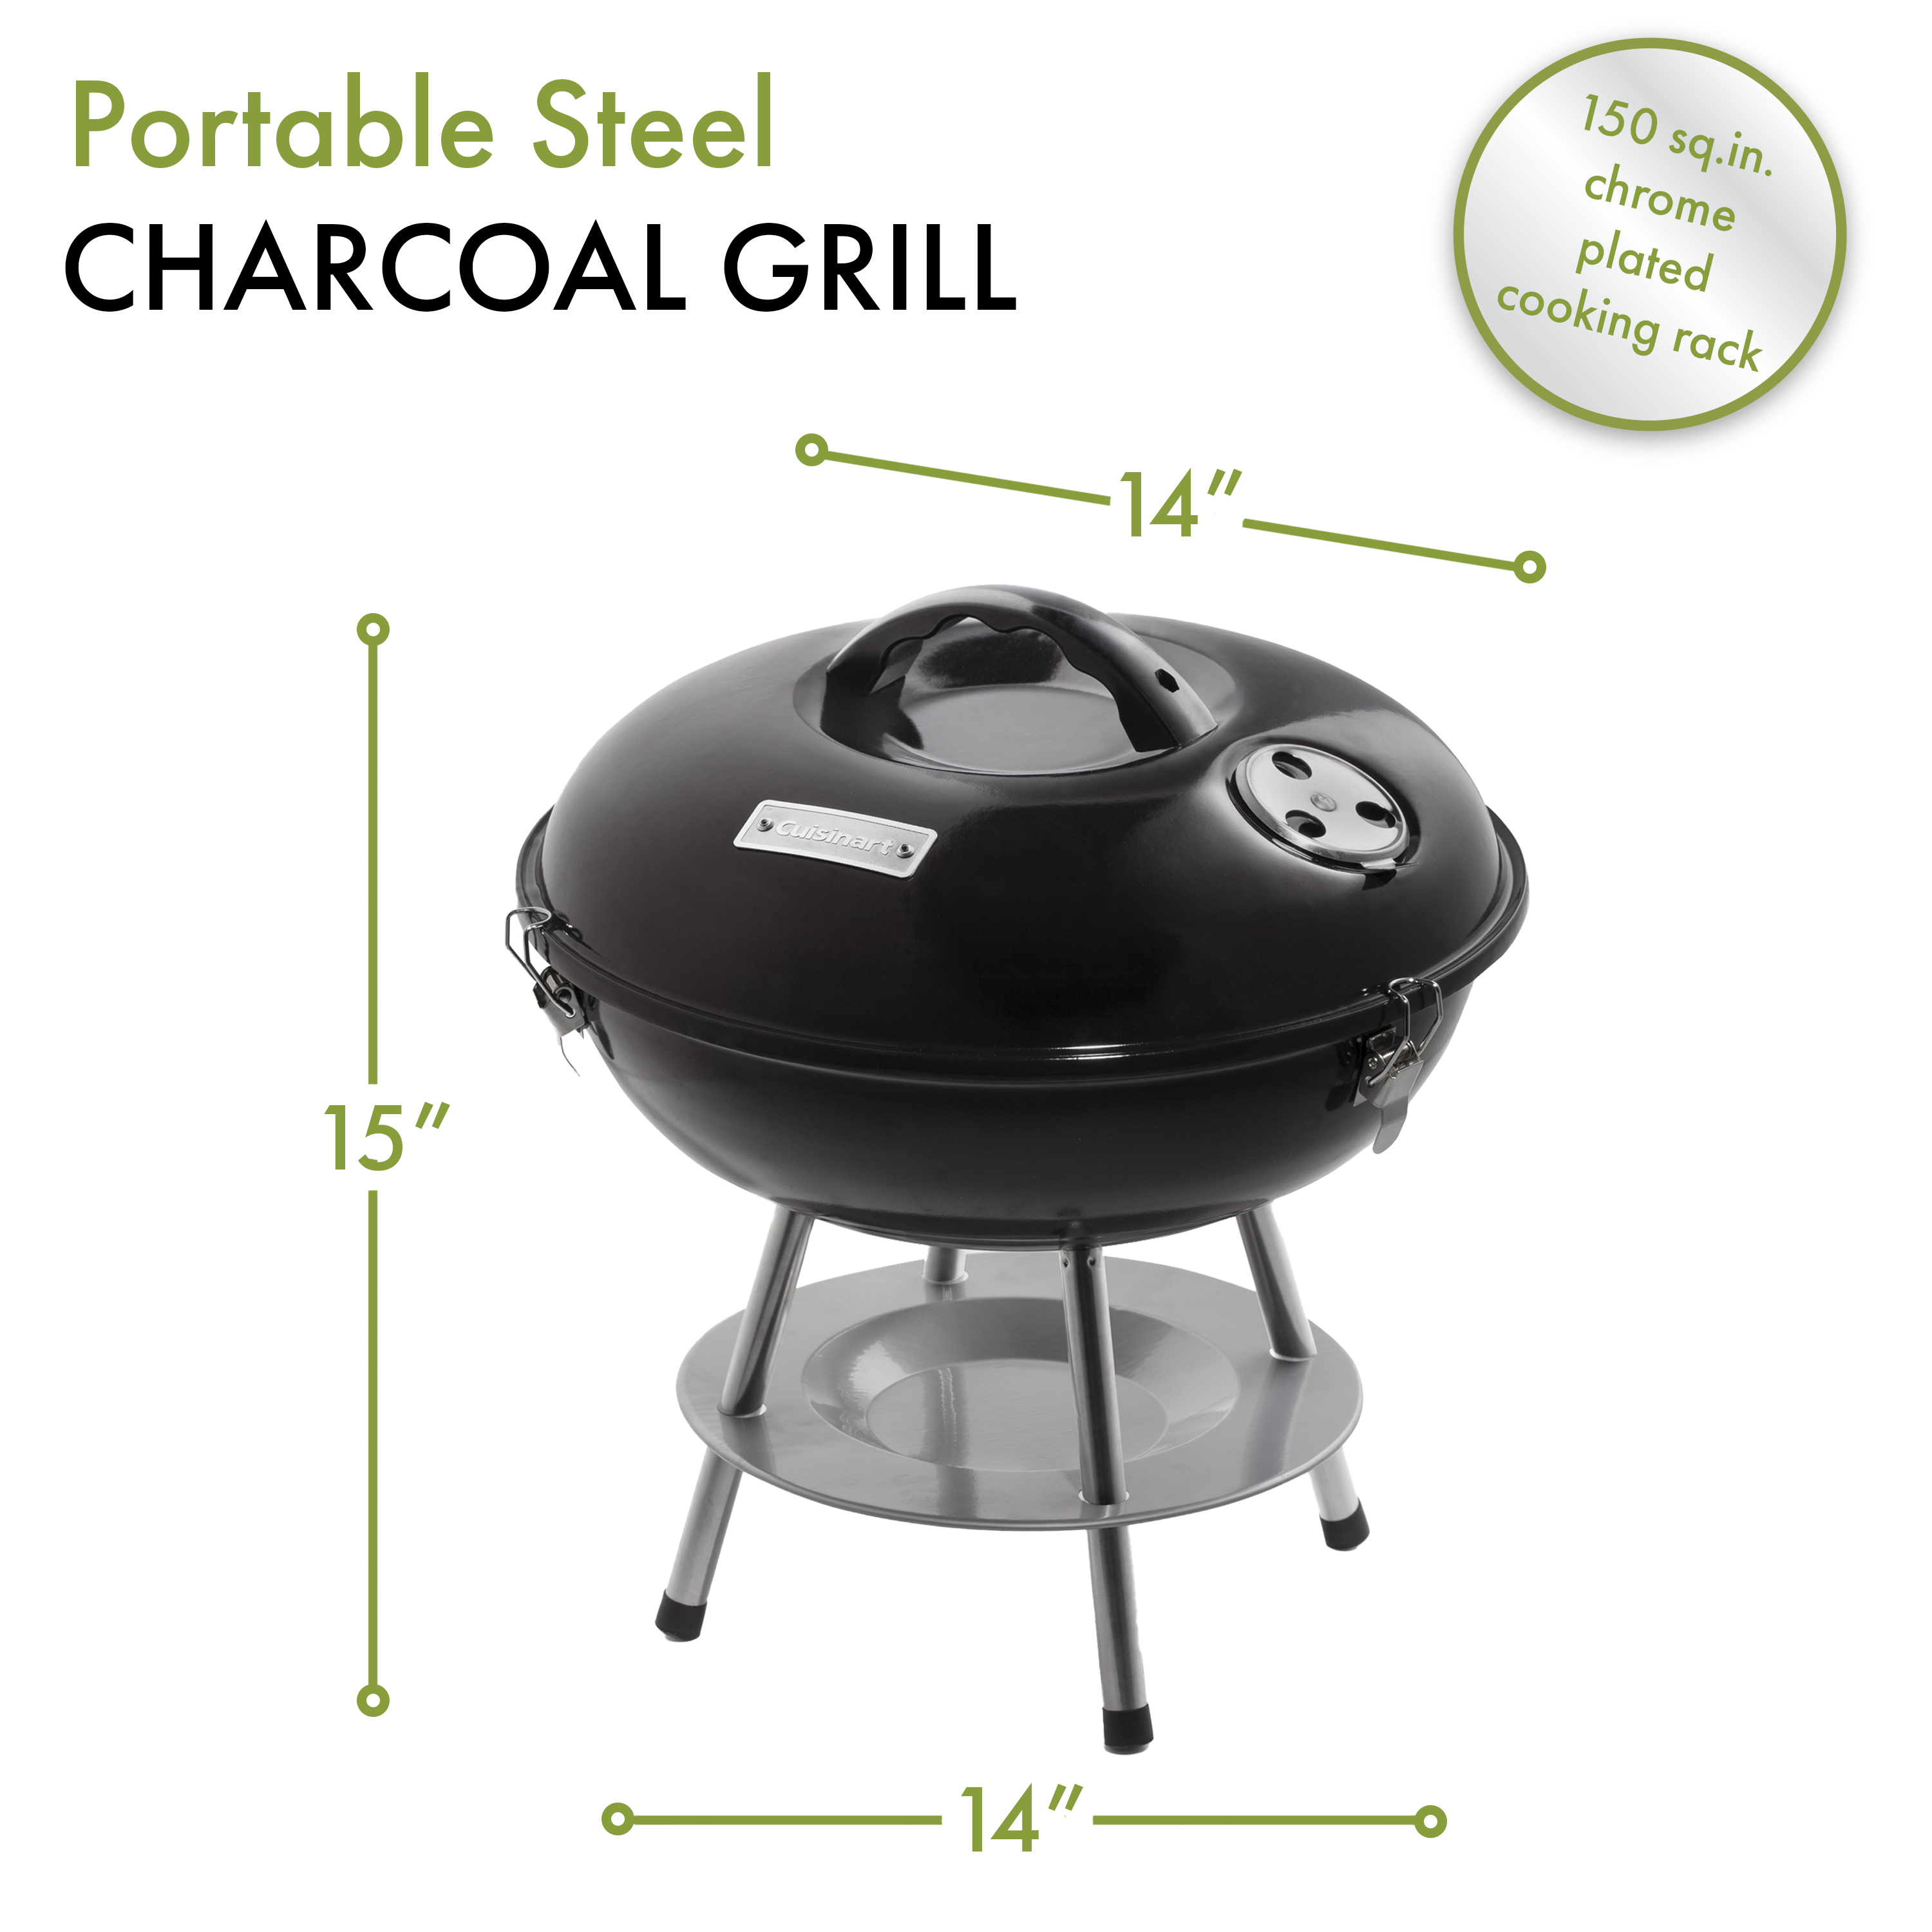 Cuisinart Portable Charcoal Grill - image 4 of 7